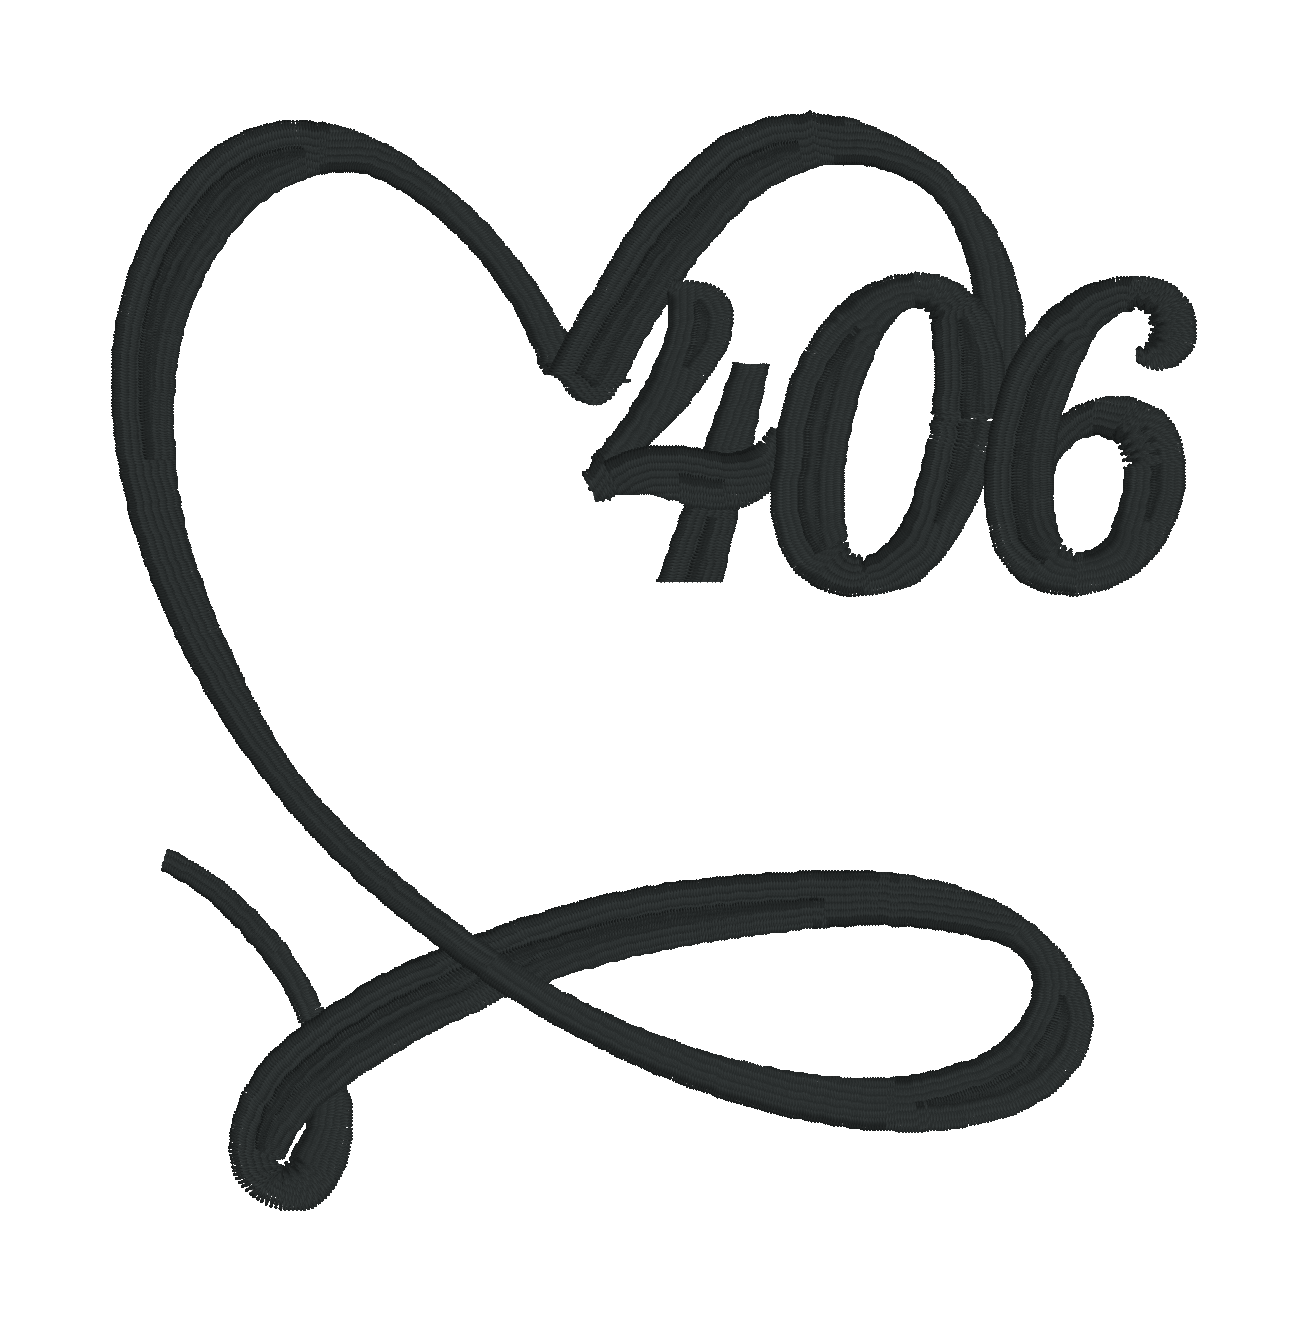 "406 Love" - The Heartbeat of Montana - Embroidered Design